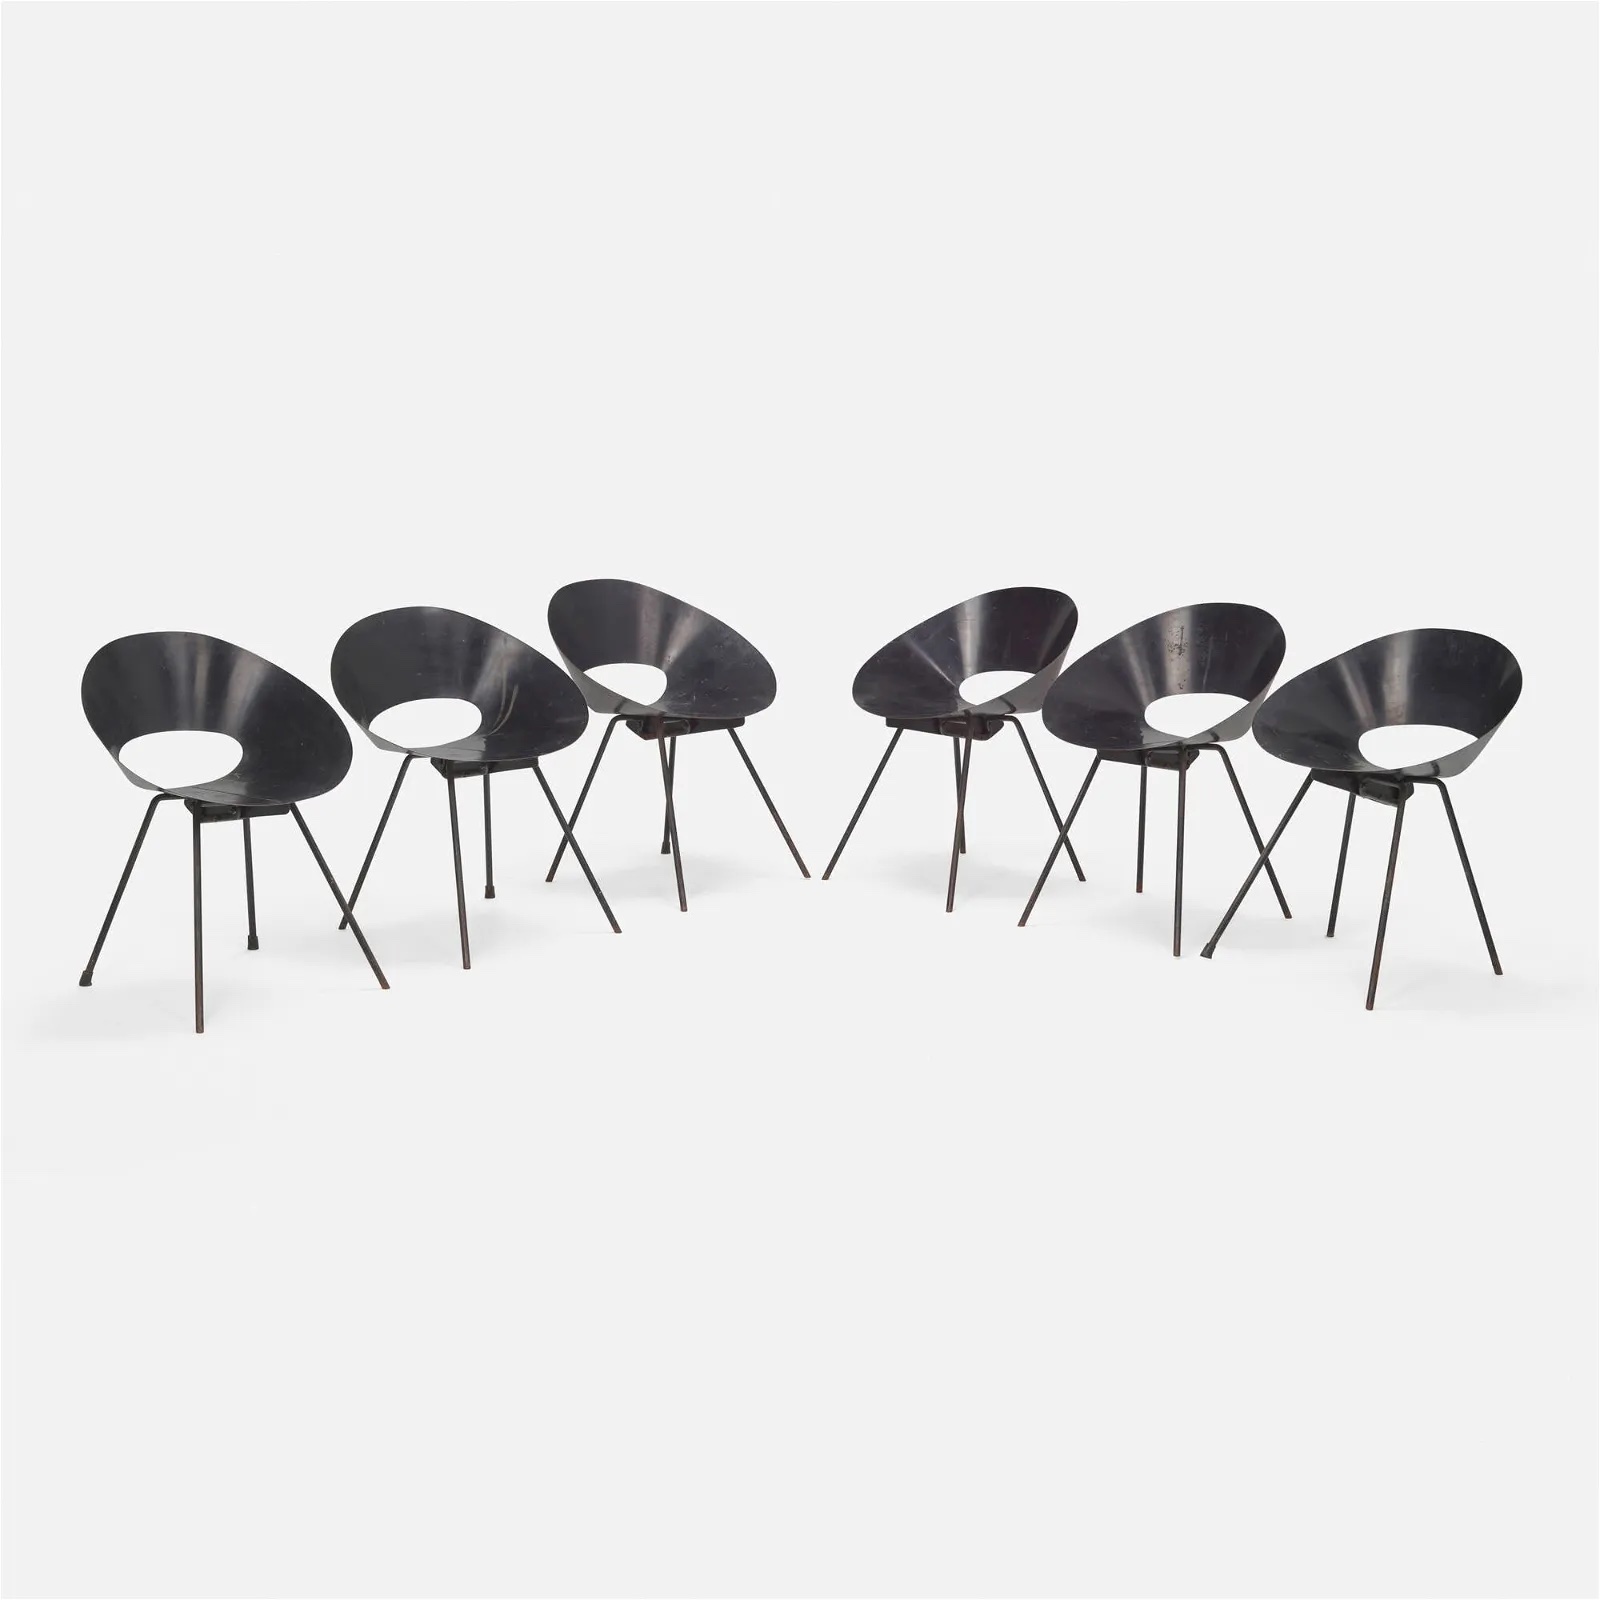 Set of six Donald Knorr chairs, model 132U, which sold for $22,000 ($28,820 with buyer’s premium) at LAMA.